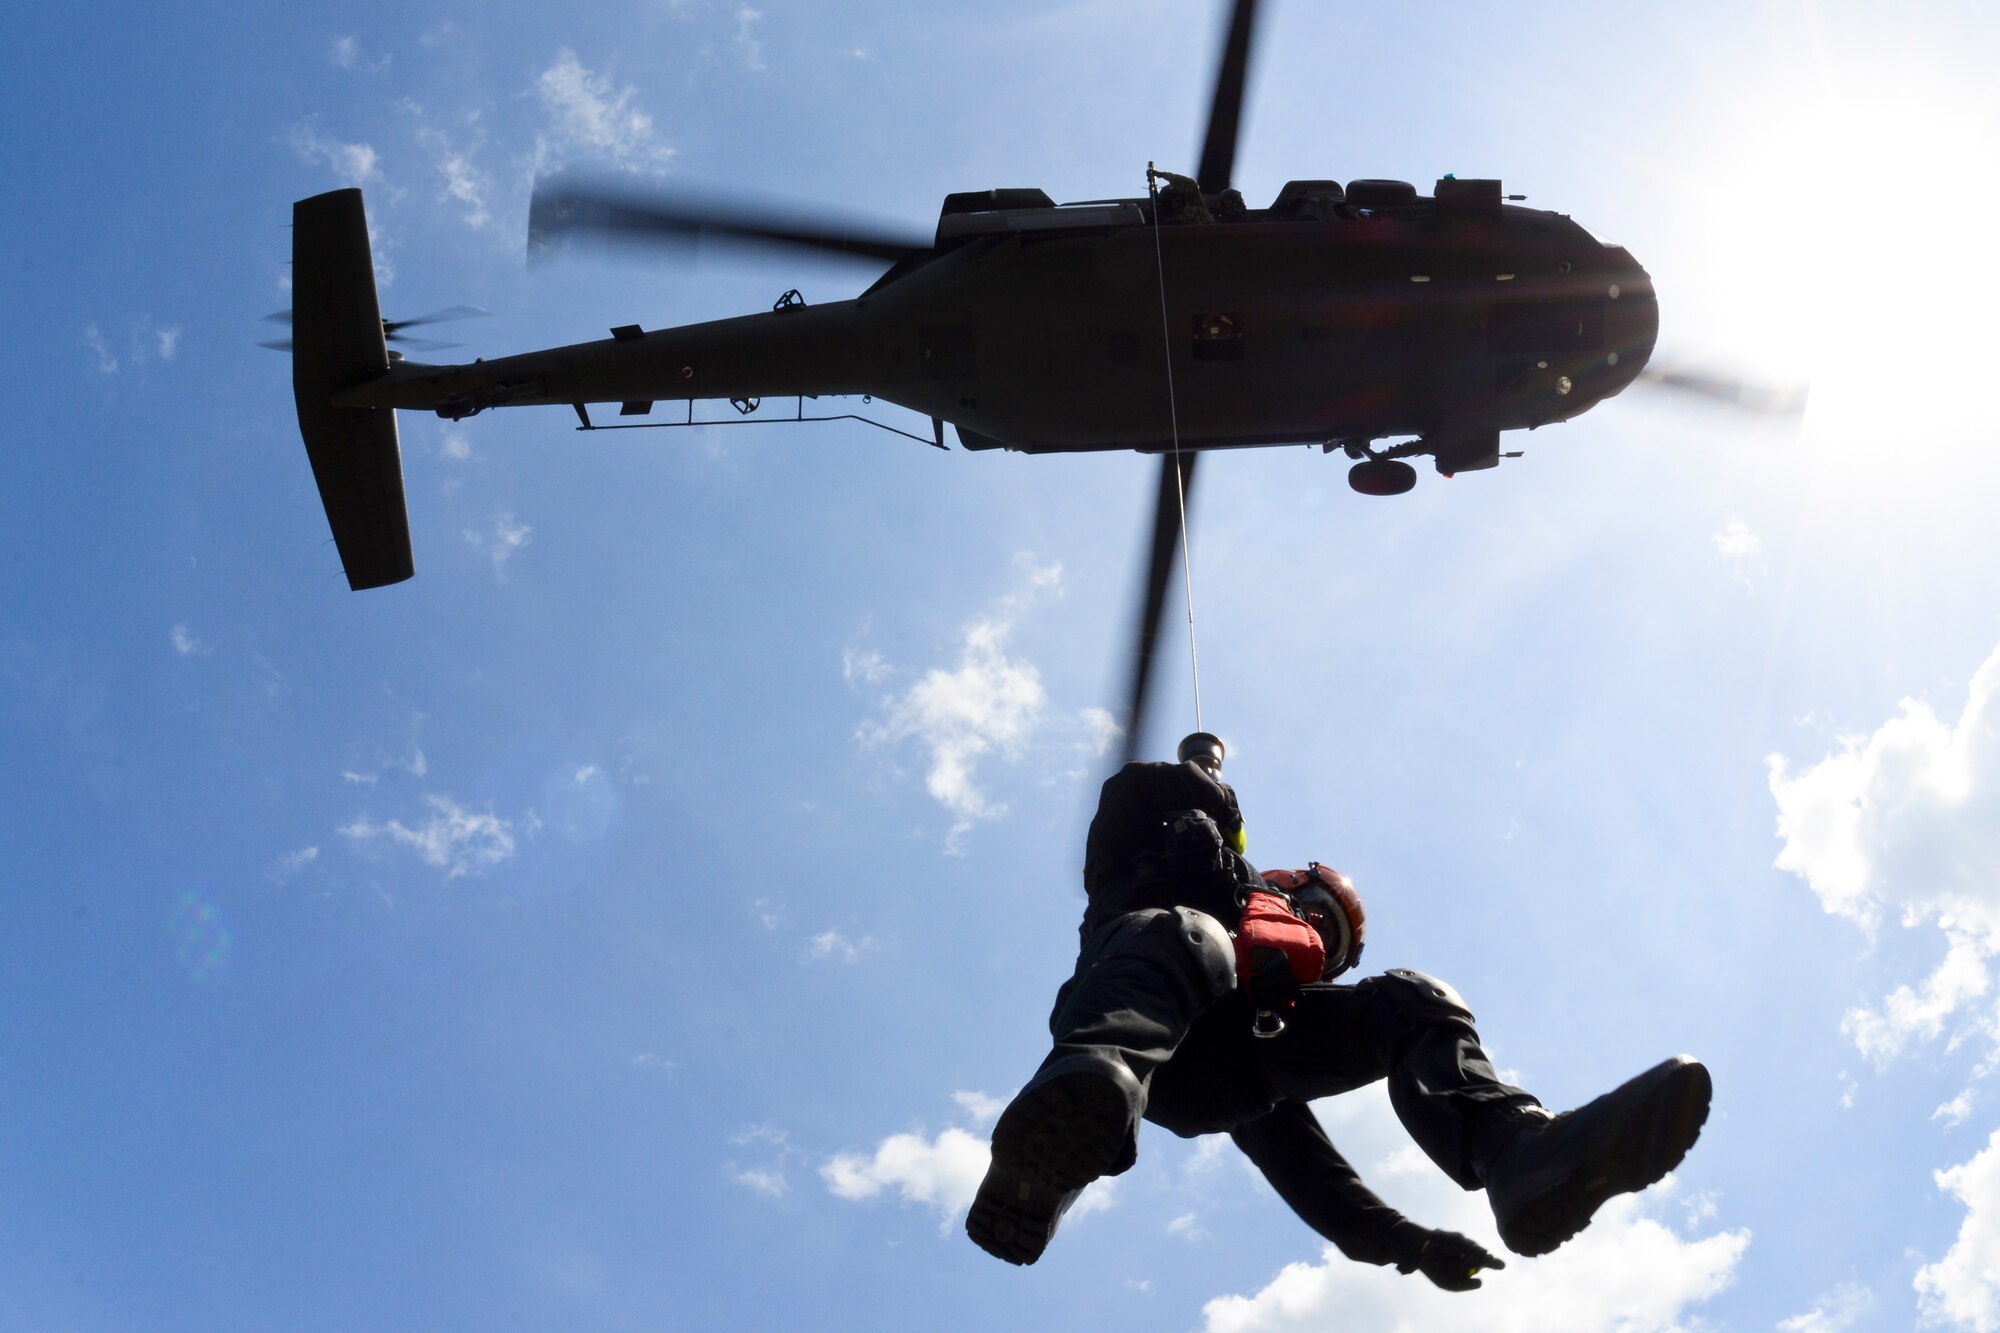 A South Carolina Helicopter Aquatic Rescue Team (SC-HART) member is lowered from a S.C. National Guard UH-60 Blackhawk helicopter to the Midway Fire Rescue tower at Pawleys Island, S.C., June 3, 2014. South Carolina National Guard Soldiers and Airmen are working side-by-side with the S.C. Emergency Management Division and first responders from local emergency agencies, to effectively respond to any hurricane that may threaten the state. The exercise is based on a hurricane post-landfall response between federal, state and local agencies, which includes training in communications, first responder skills, with the focus on how to better protect and assist citizens during emergency situations.  (U.S. Air National Guard photo by Tech. Sgt. Jorge Intriago/Released)
